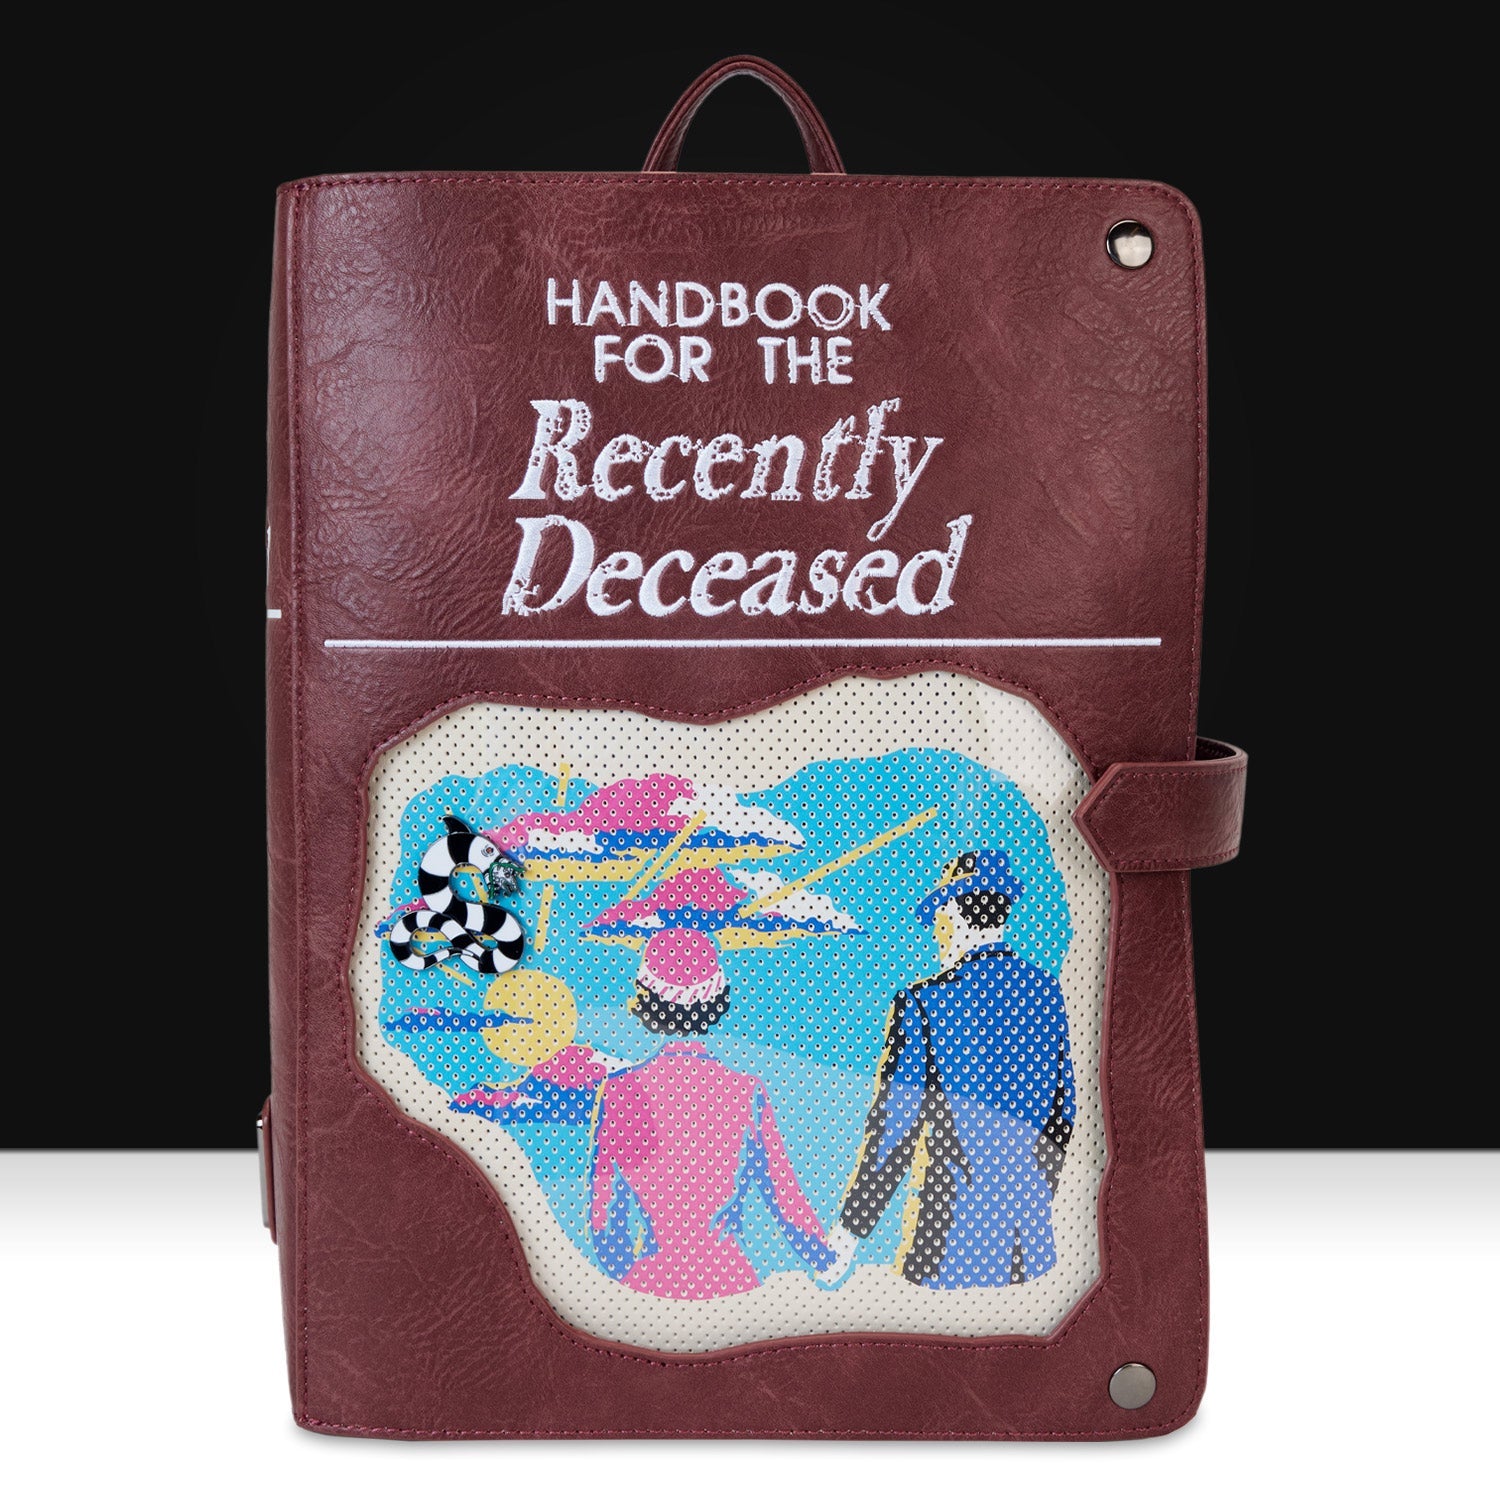 Loungefly x Beetlejuice Handbook For The Recently Deceased Pin Trader Backpack - GeekCore